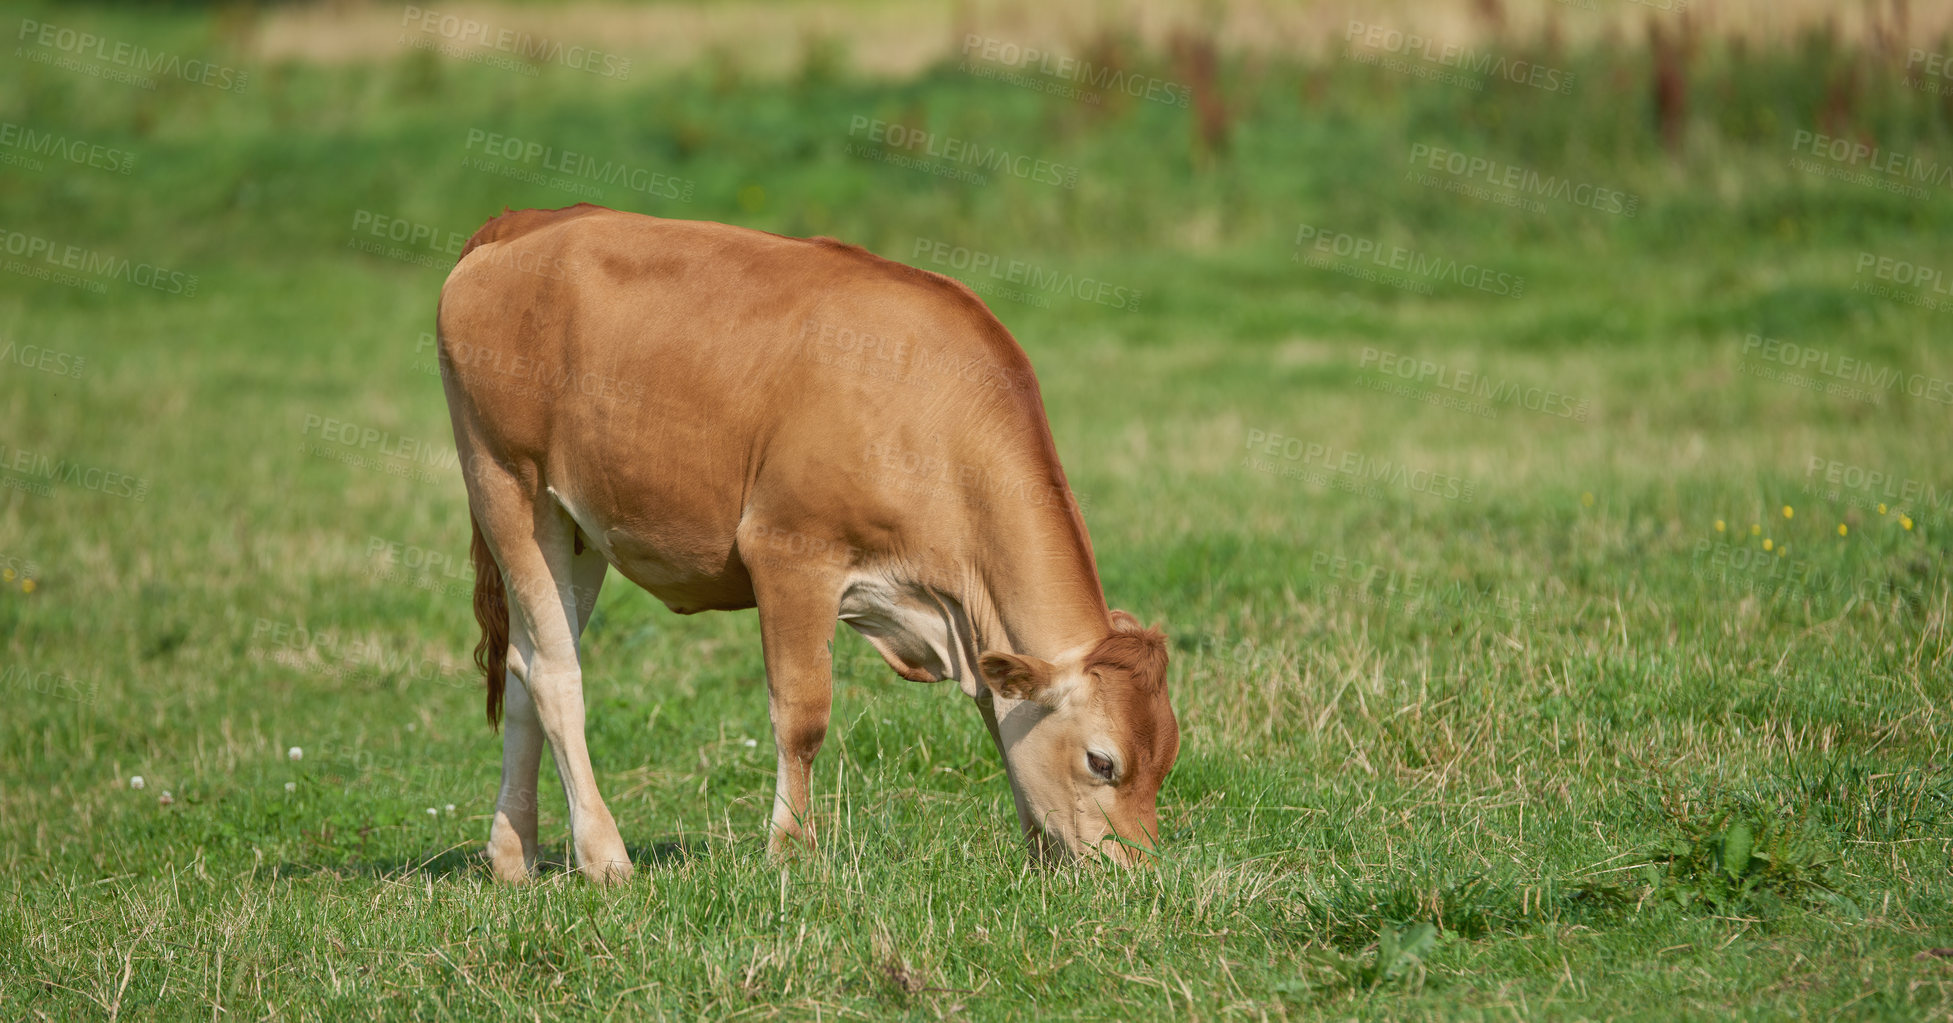 Buy stock photo Brown calf eating and grazing on green farmland in the countryside. Cow or livestock standing on an open, empty and secluded lush grassy field or meadow. Animal in its natural pasture or environment.